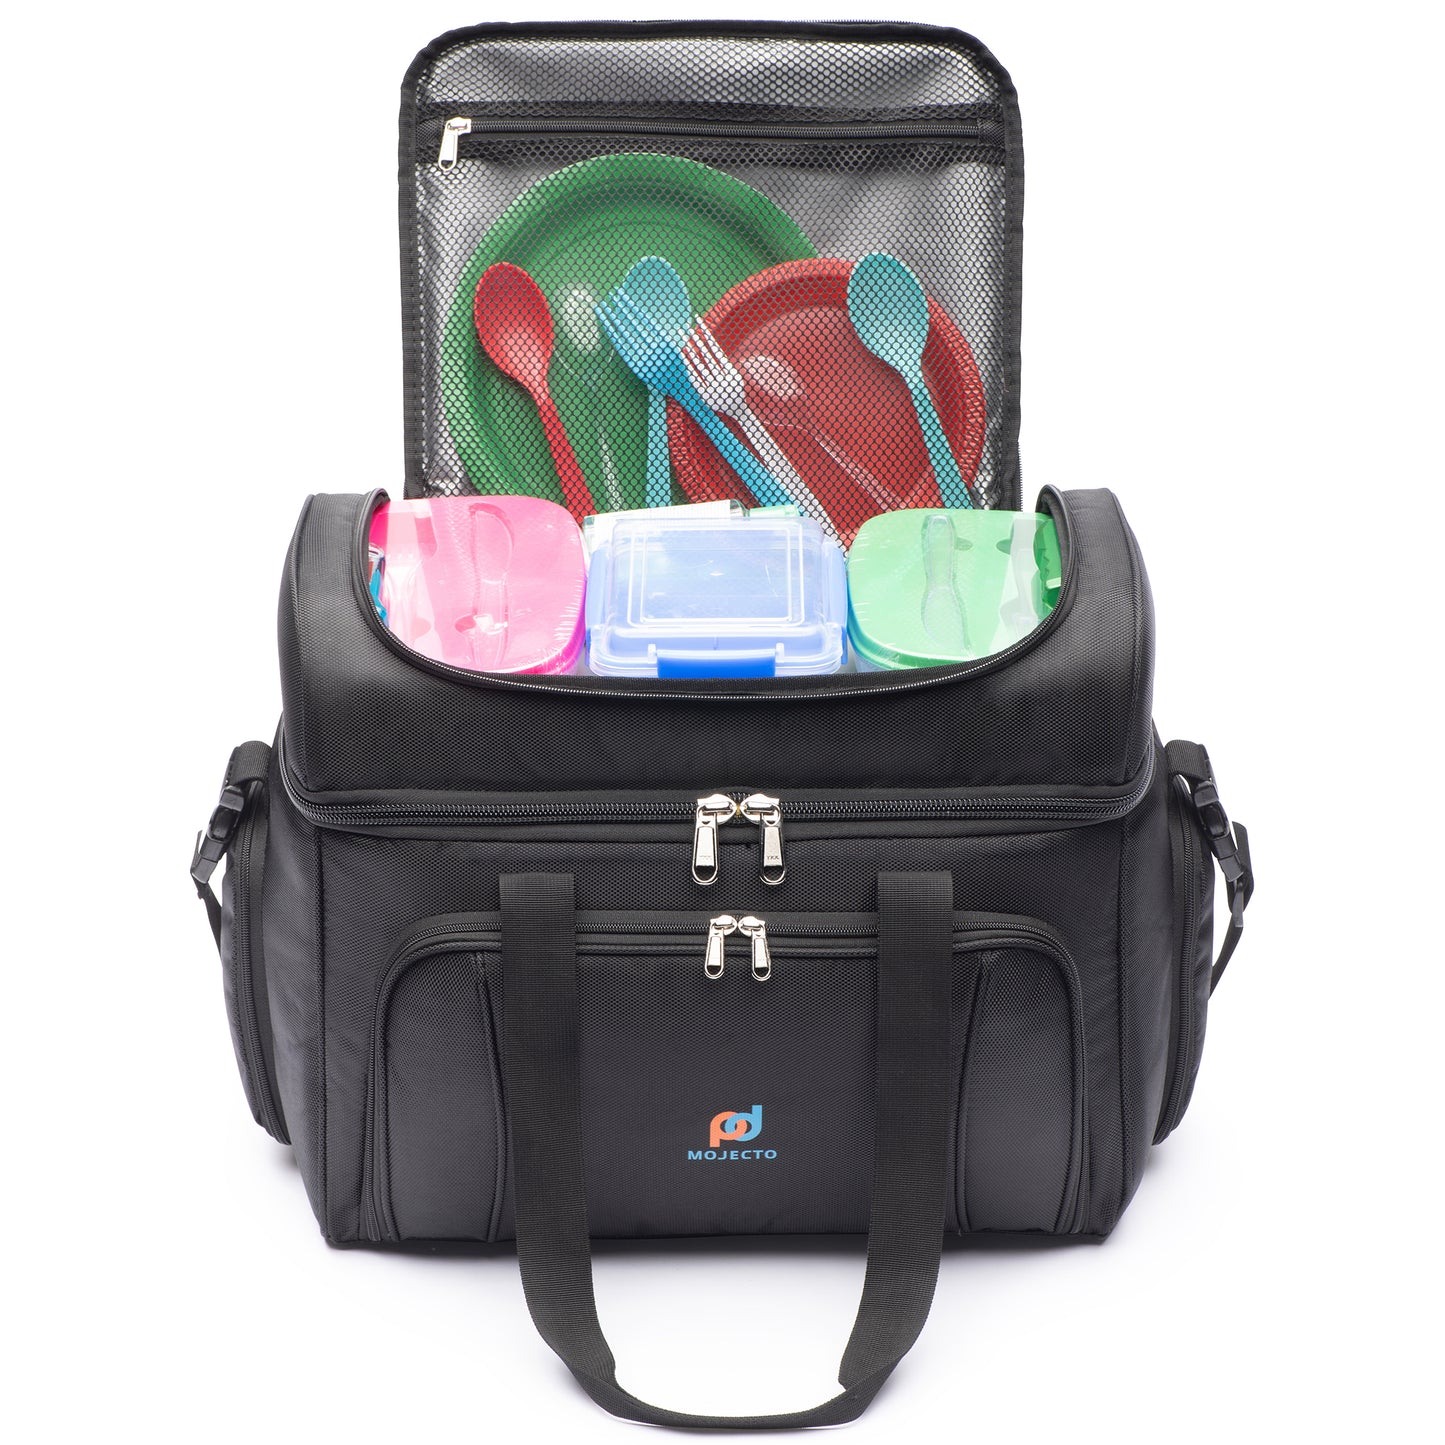 XXX-Large Cooler Bag (17x14x10 In). Two Insulated Compartment, Heavy Duty Fabric, Durable Zippers.